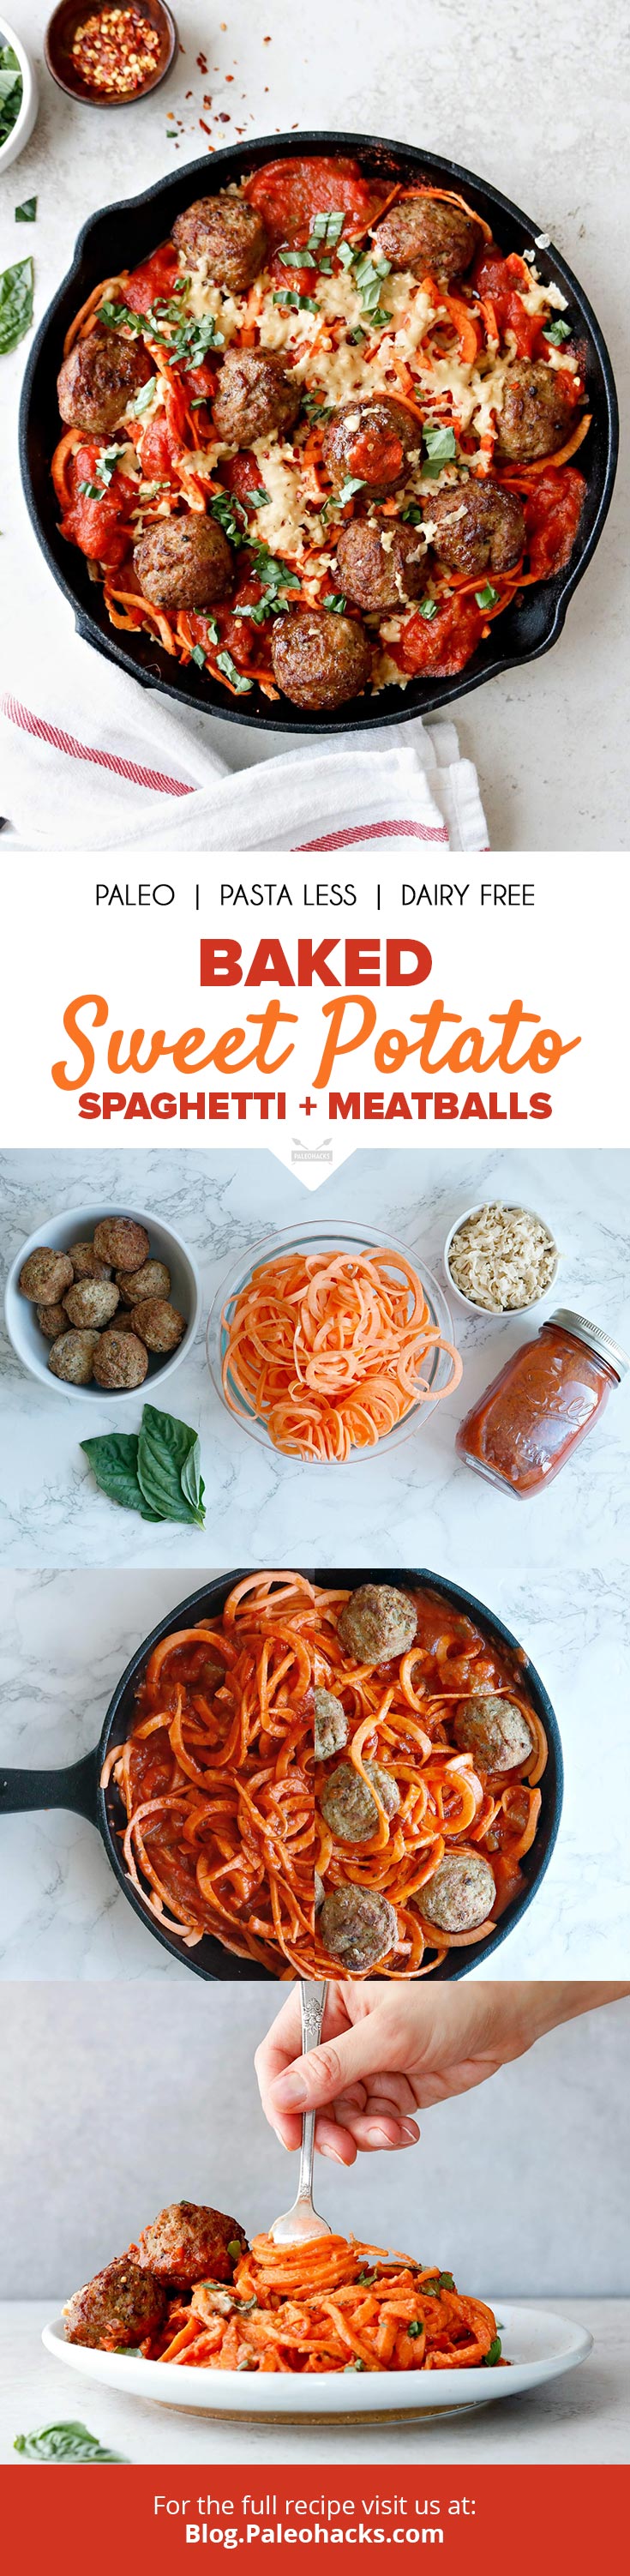 This baked sweet potato spaghetti and meatballs recipe is a surefire way to curb a pasta craving, sans wheat.